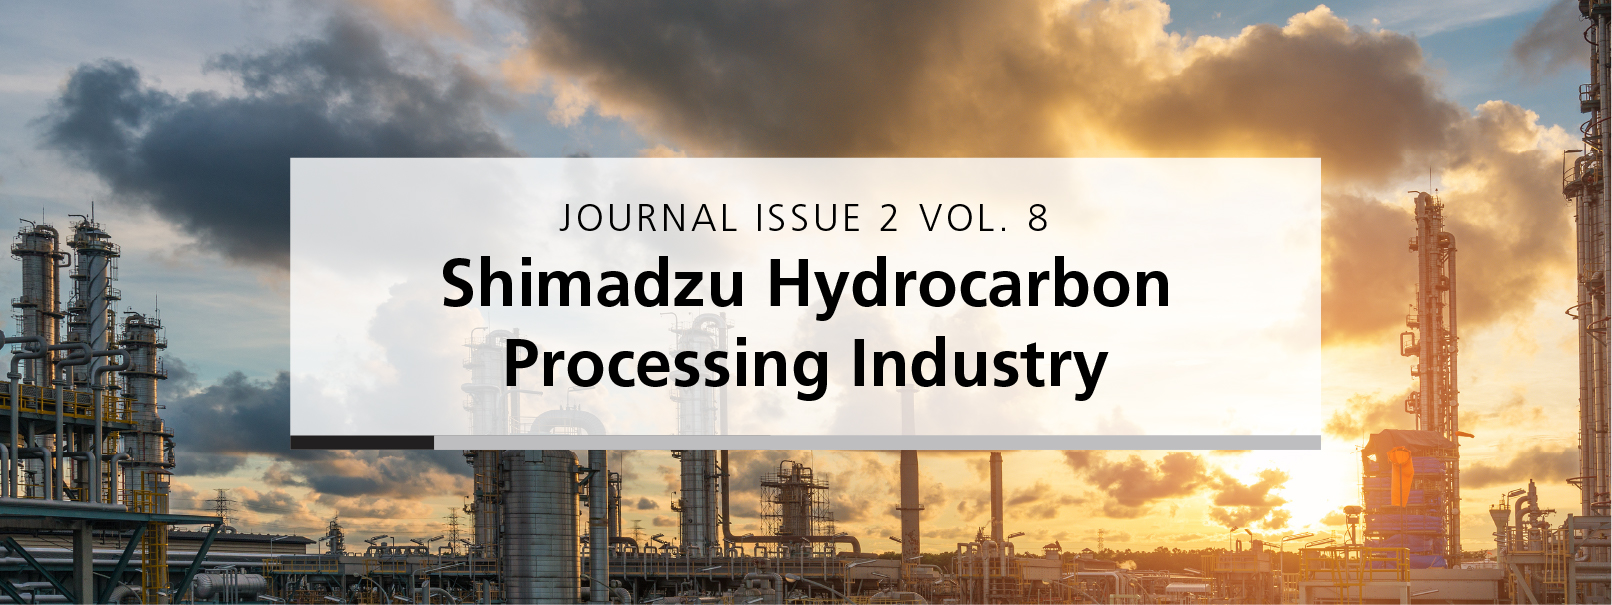 Journal Issue 2 Vol. 8, Shimadzu Hydrocarbon Processing Industry